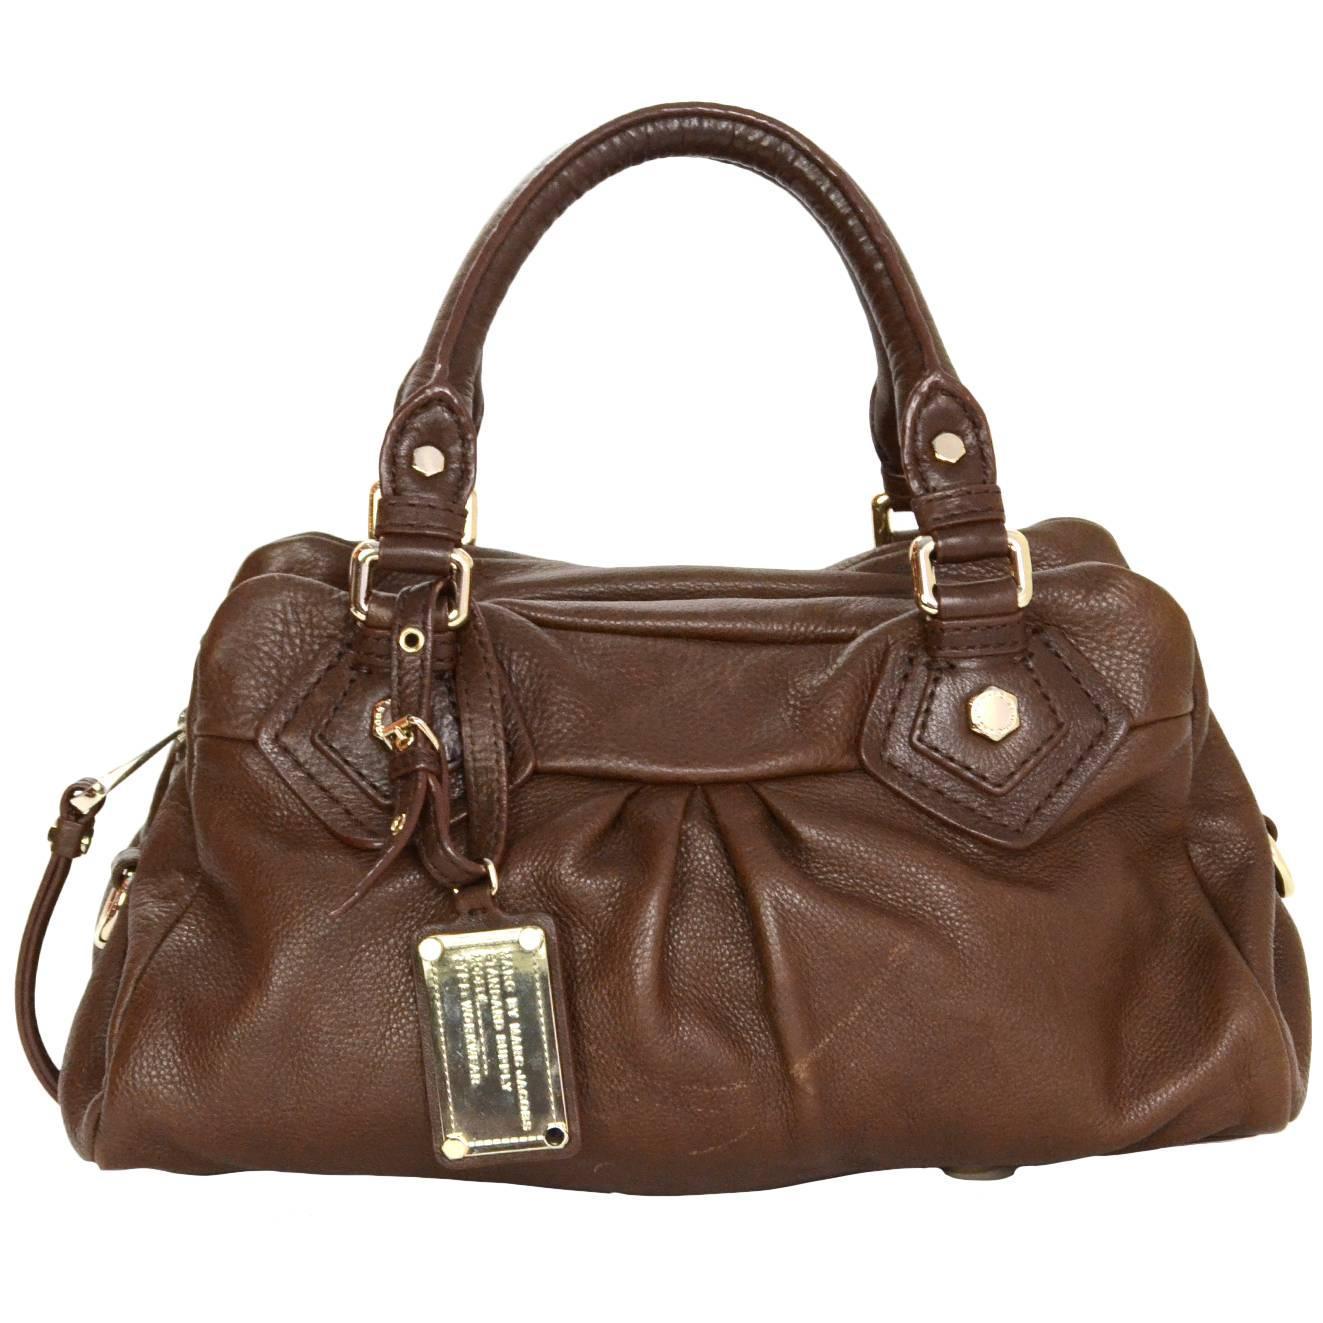 Marc by Marc Jacobs Classic Q Groovee Satchel Bag For Sale at 1stdibs